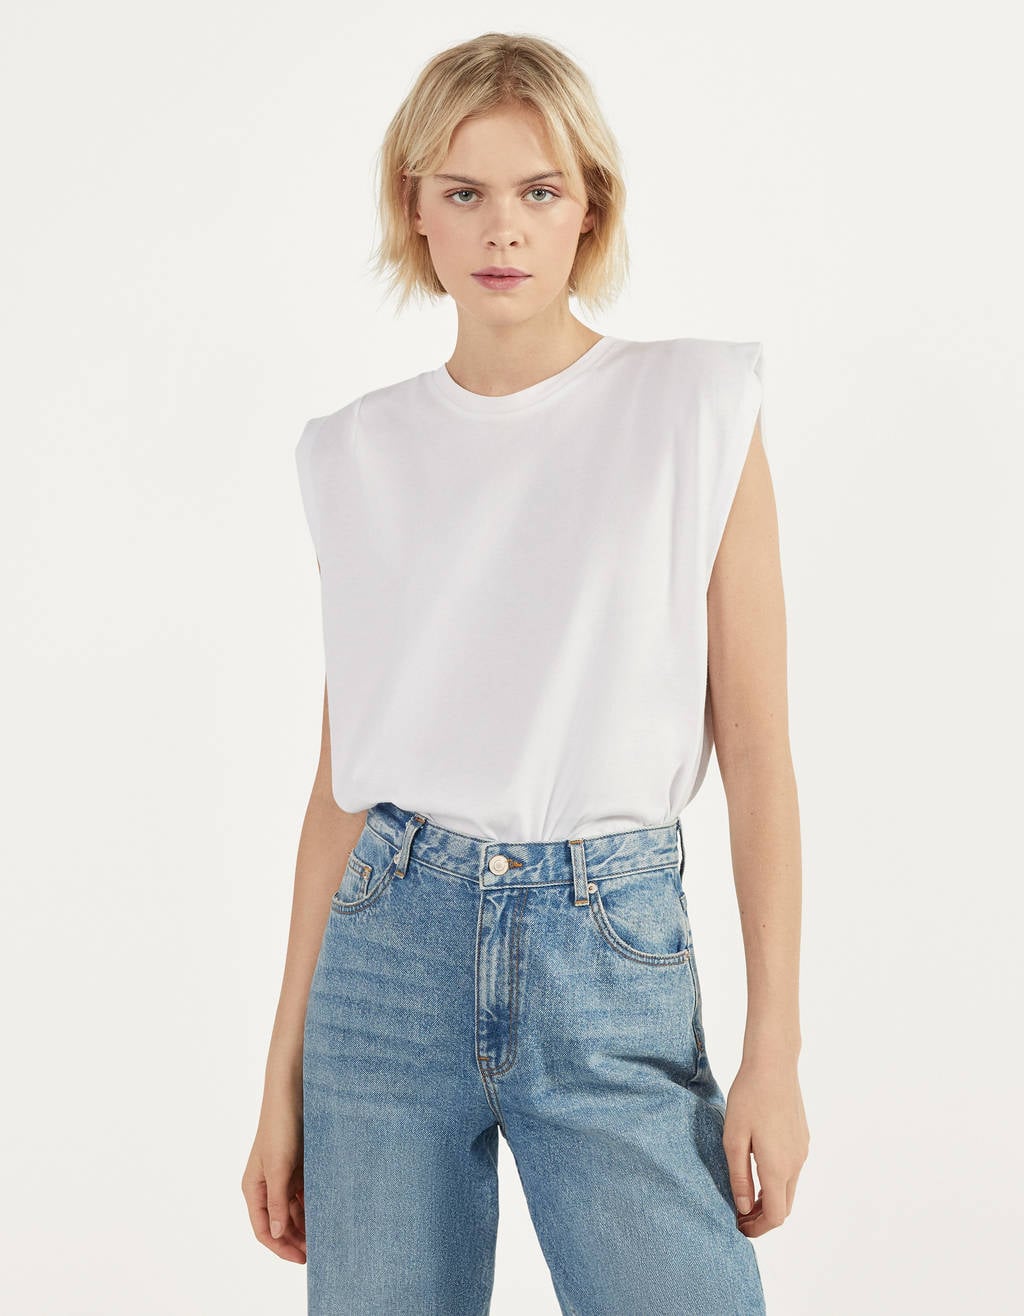 Bershka T-Shirt With Pleats Along the Shoulders | The 2-Piece Outfit to Try If You're Ready Wear Jeans Again | POPSUGAR Fashion Photo 19